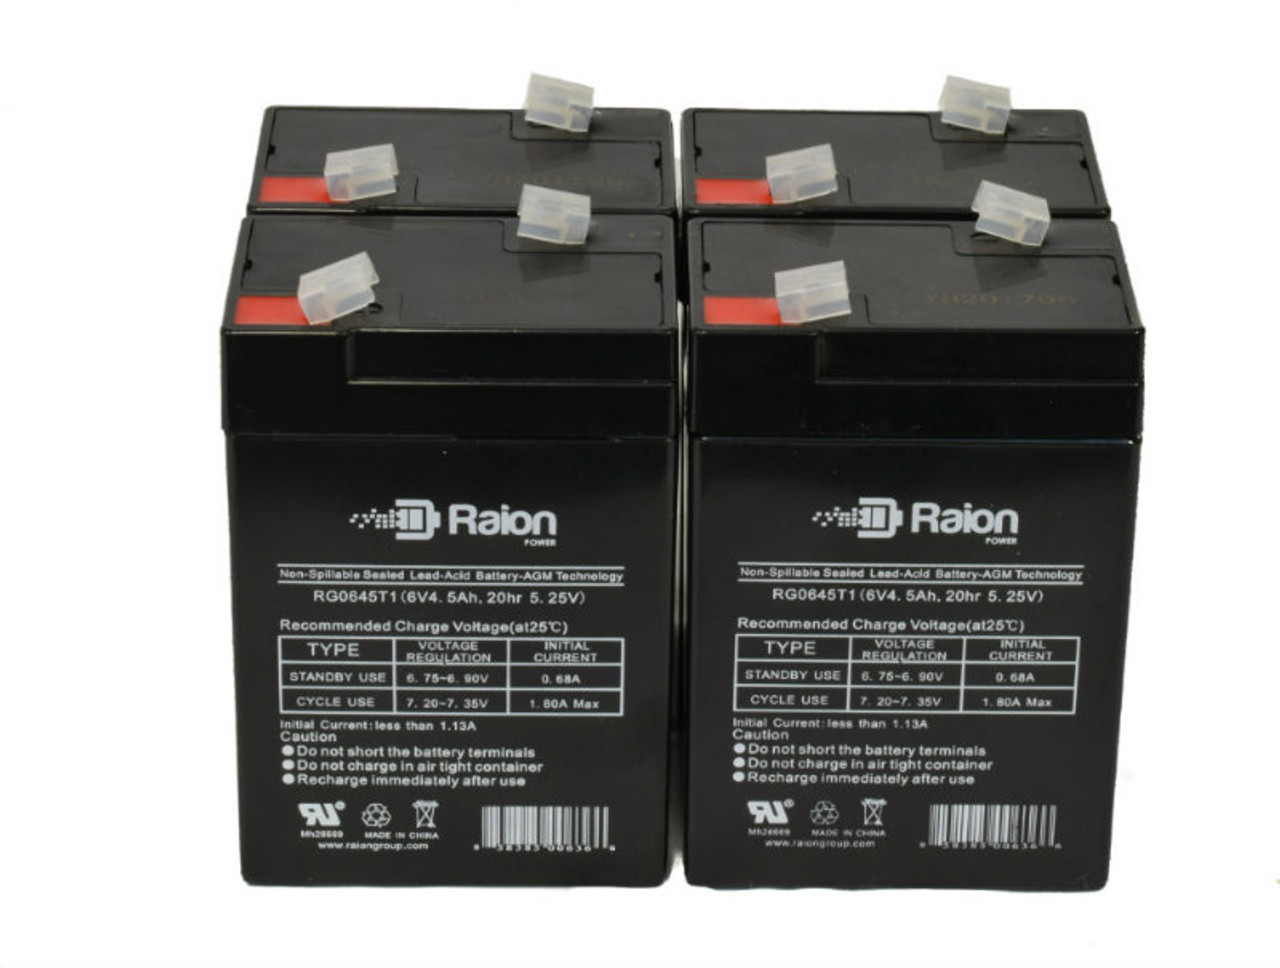 Raion Power RG0645T1 6V 4.5Ah Replacement Medical Equipment Battery for Criticare Systems 502Us Pulse Oximeters - 4 Pack